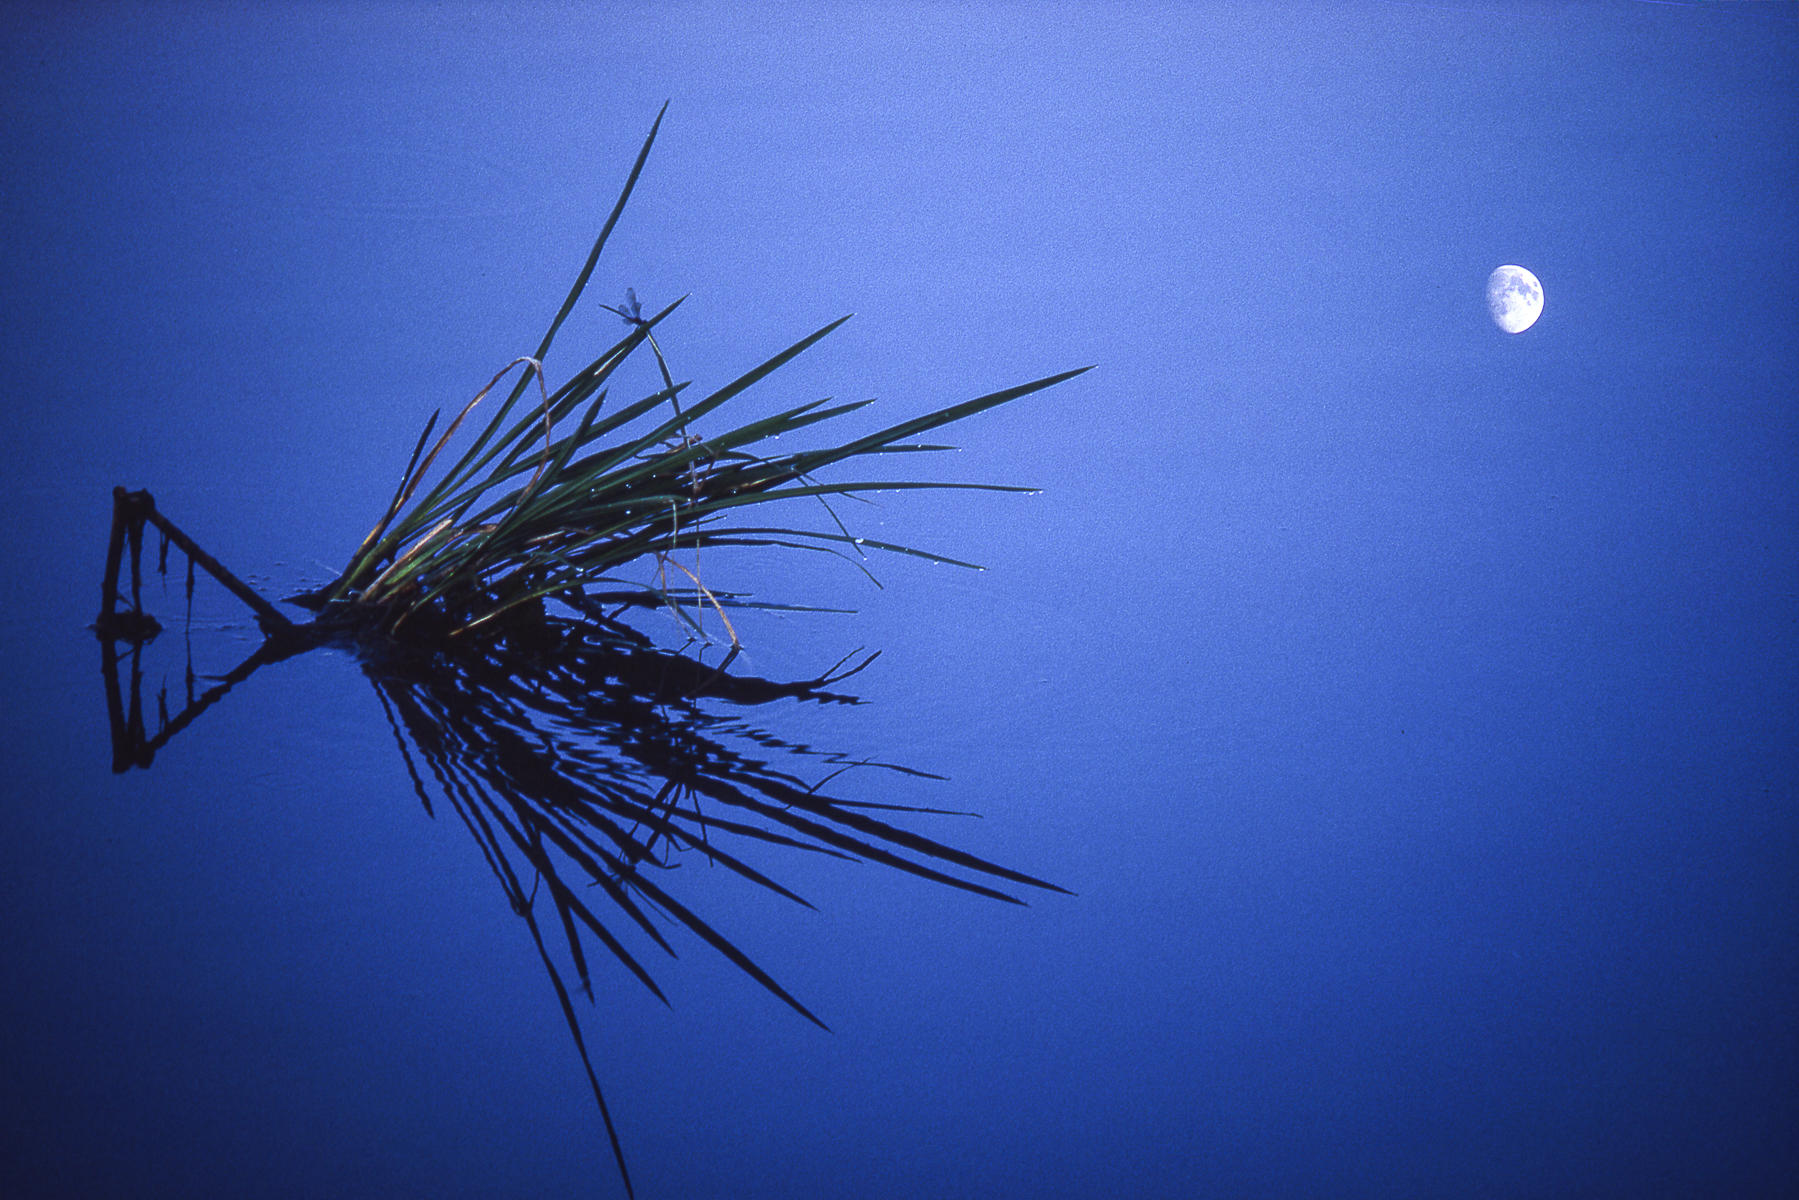 Moon and Dragonfly, Bivens Arm Nature Preserve, Florida.
This is an in-camera blend inspired by Jerry Uelsmann.